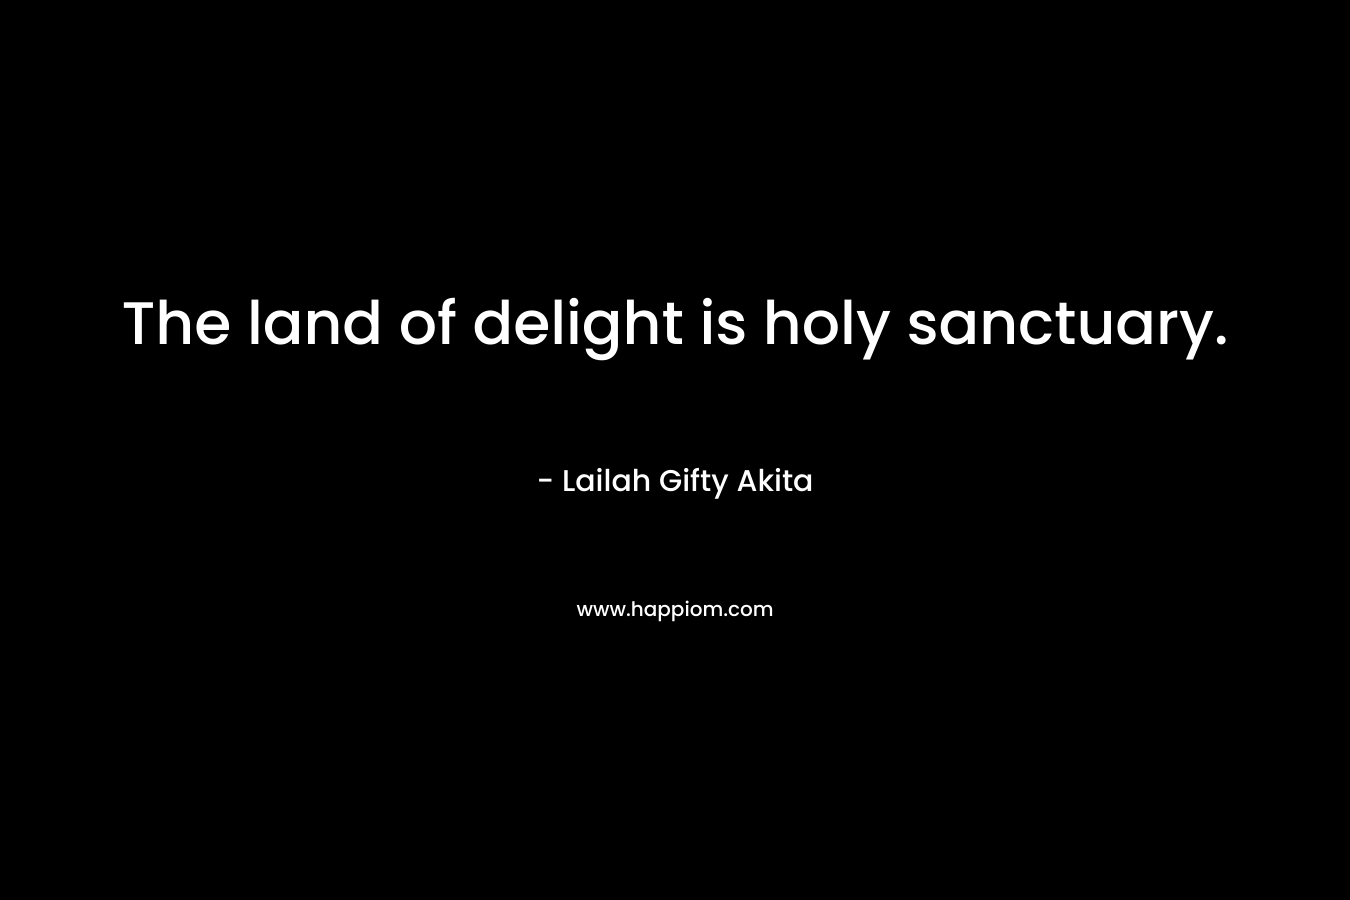 The land of delight is holy sanctuary.